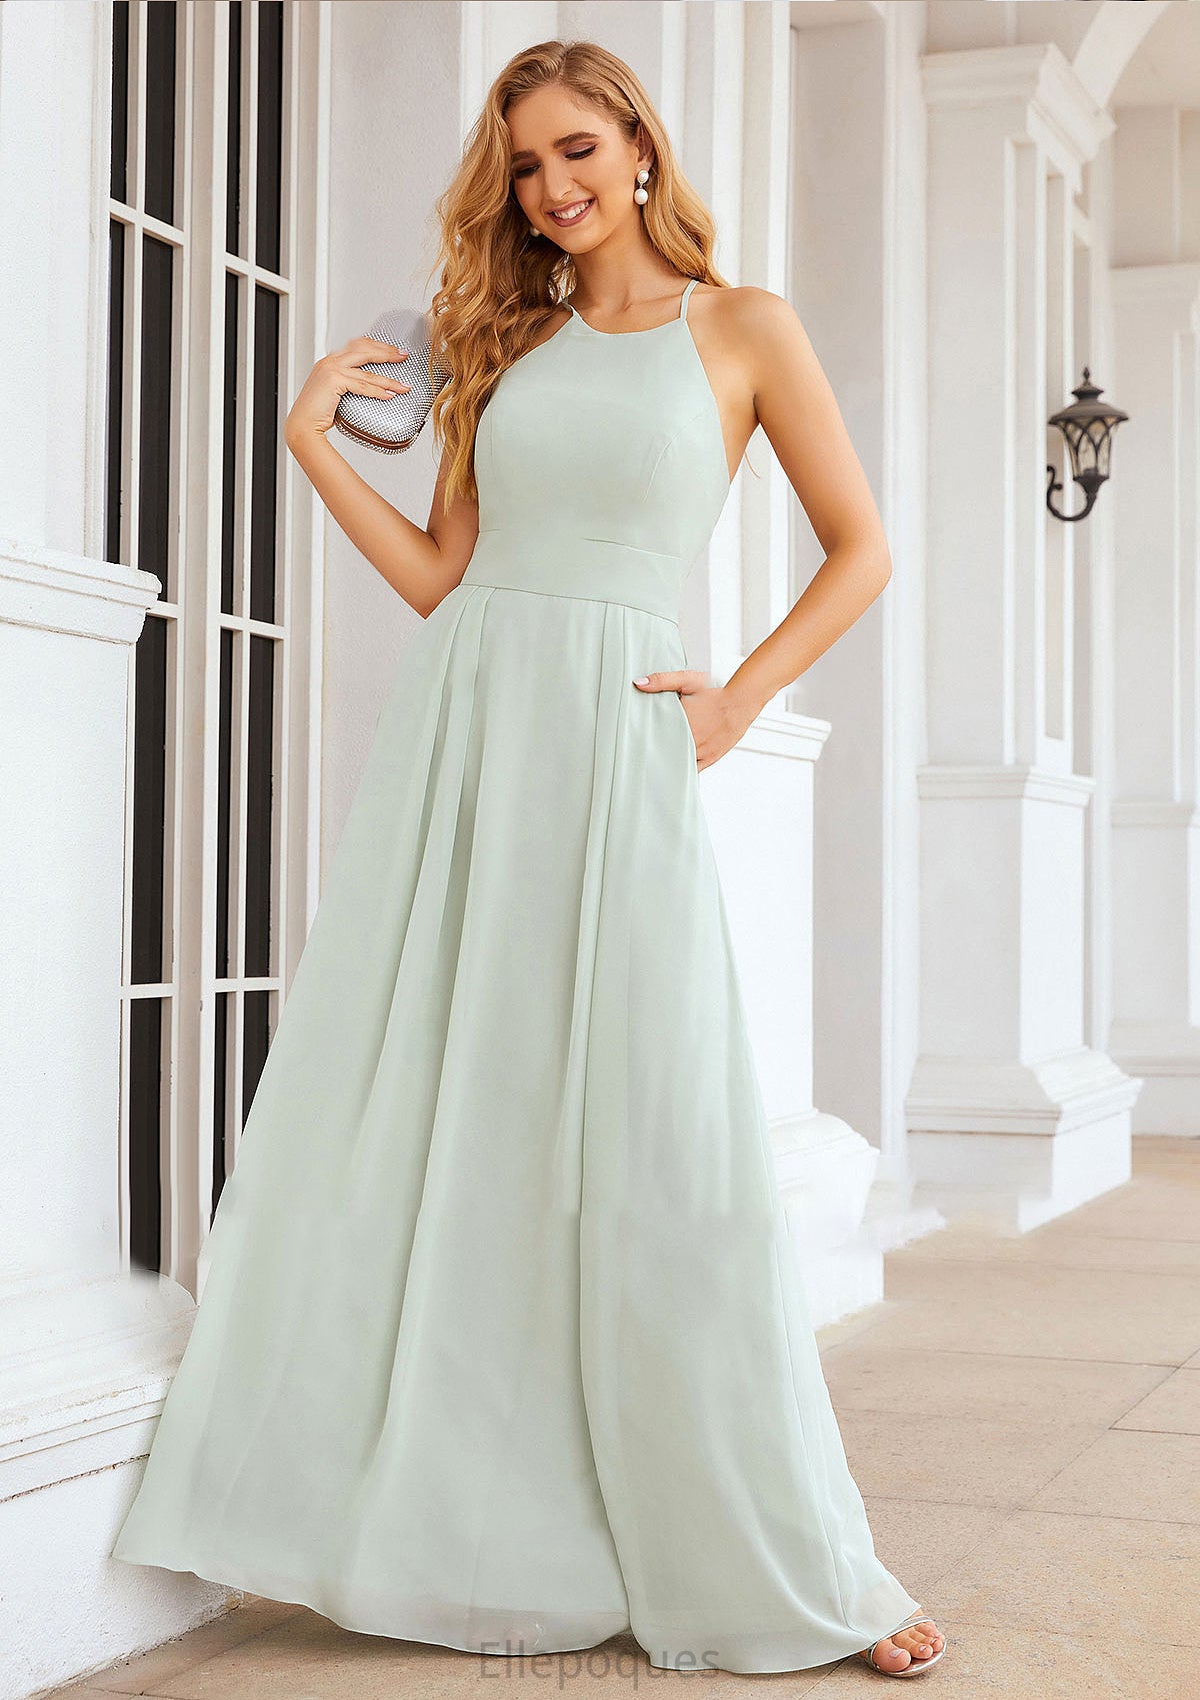 A-line Scoop Neck Sleeveless Long/Floor-Length Chiffon Bridesmaid Dresses With Pleated Pockets Carley HOP0025378